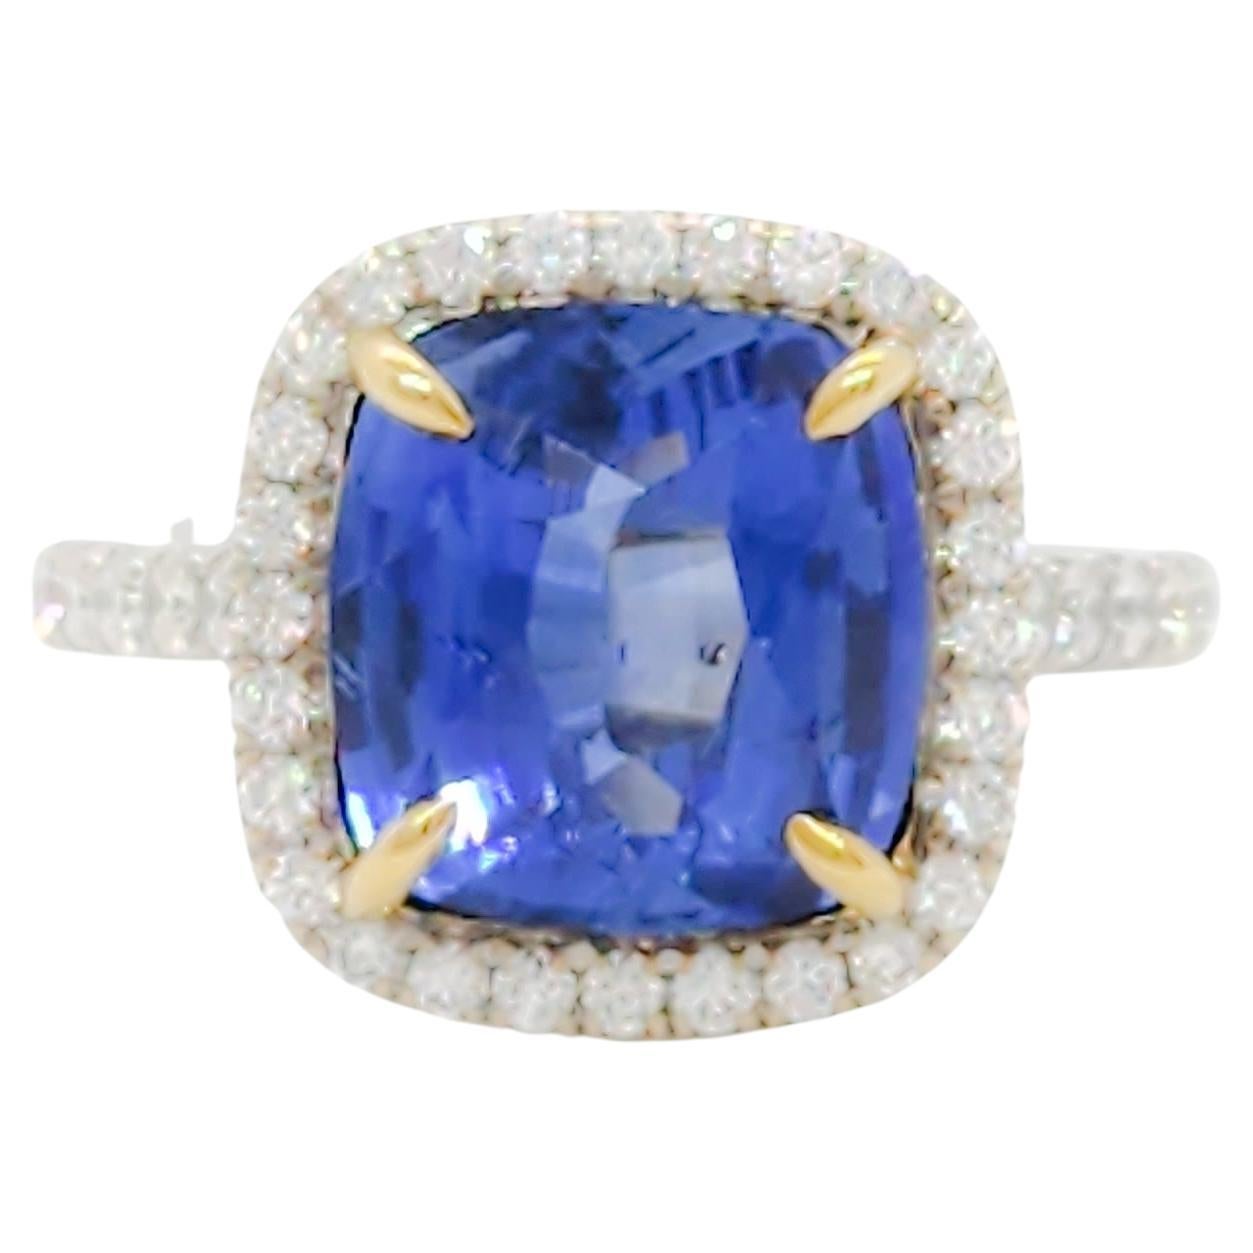 Blue Sapphire and White Diamond Cocktail Ring in 18k Two Tone Gold